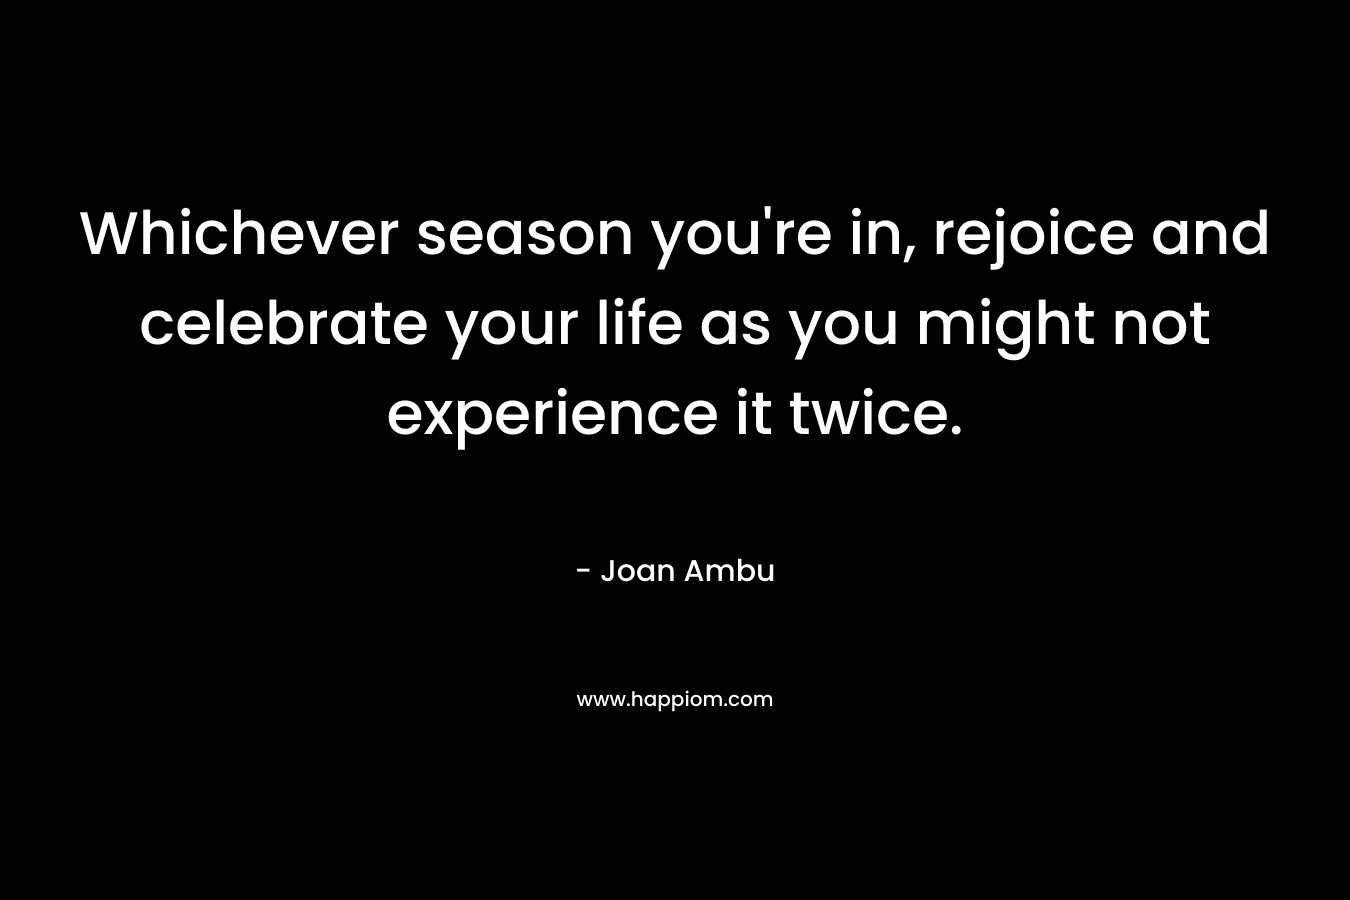 Whichever season you’re in, rejoice and celebrate your life as you might not experience it twice. – Joan Ambu